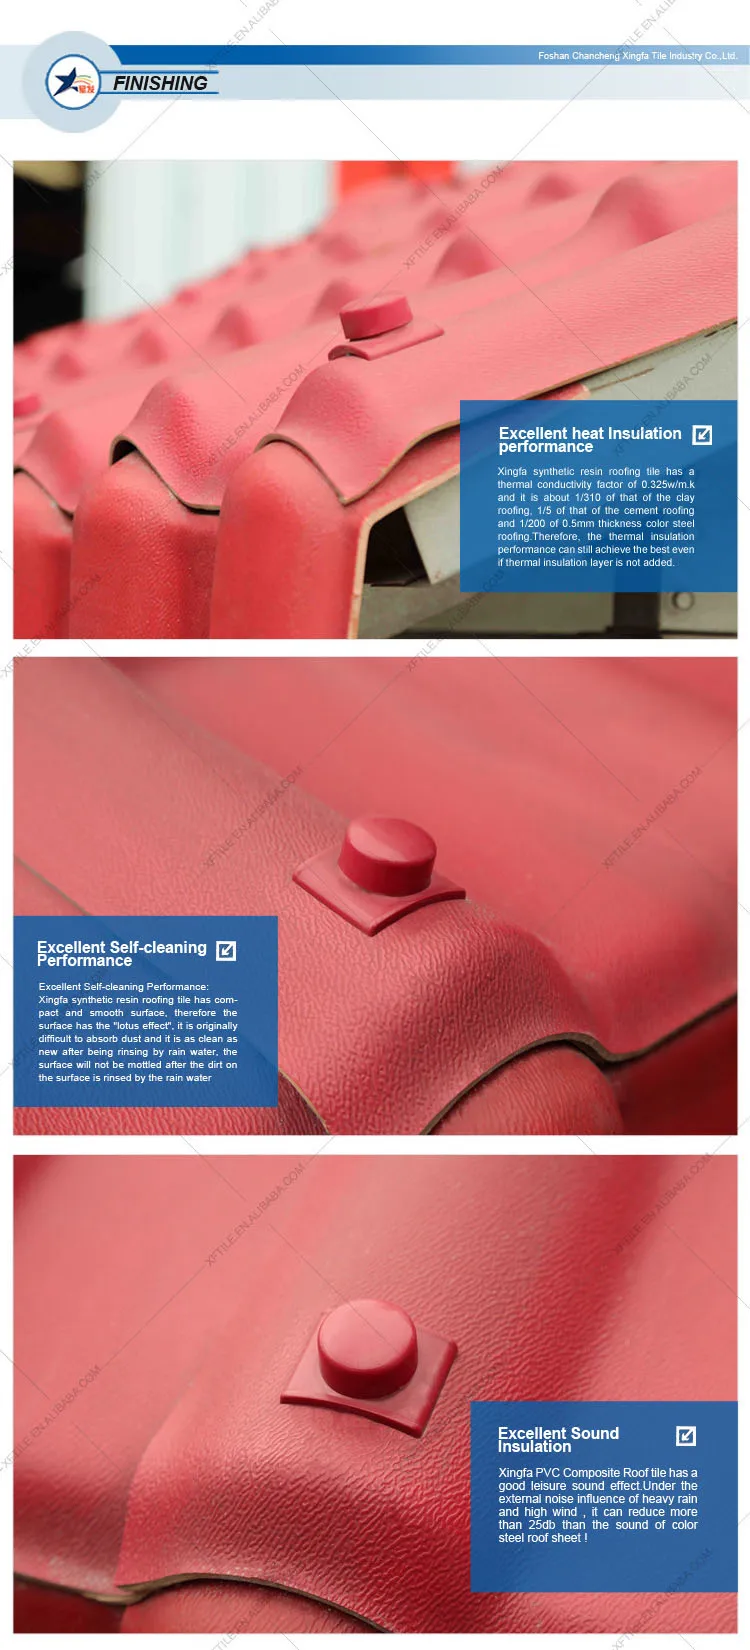 XF sound insulation boral ceiling roof tile Accessories